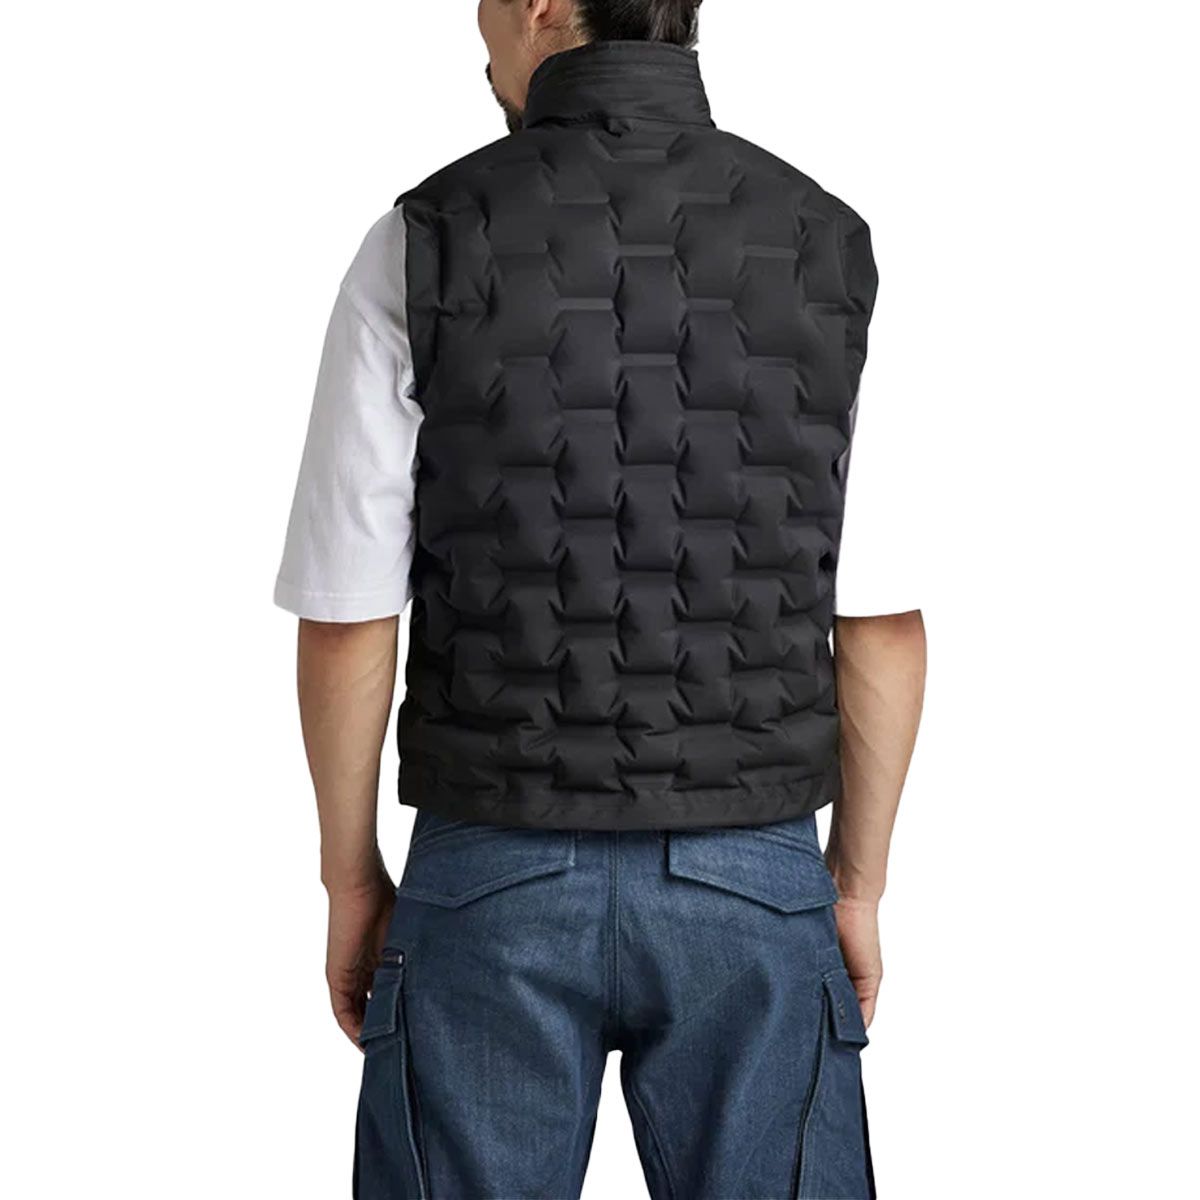 Inflatable Body Warmer